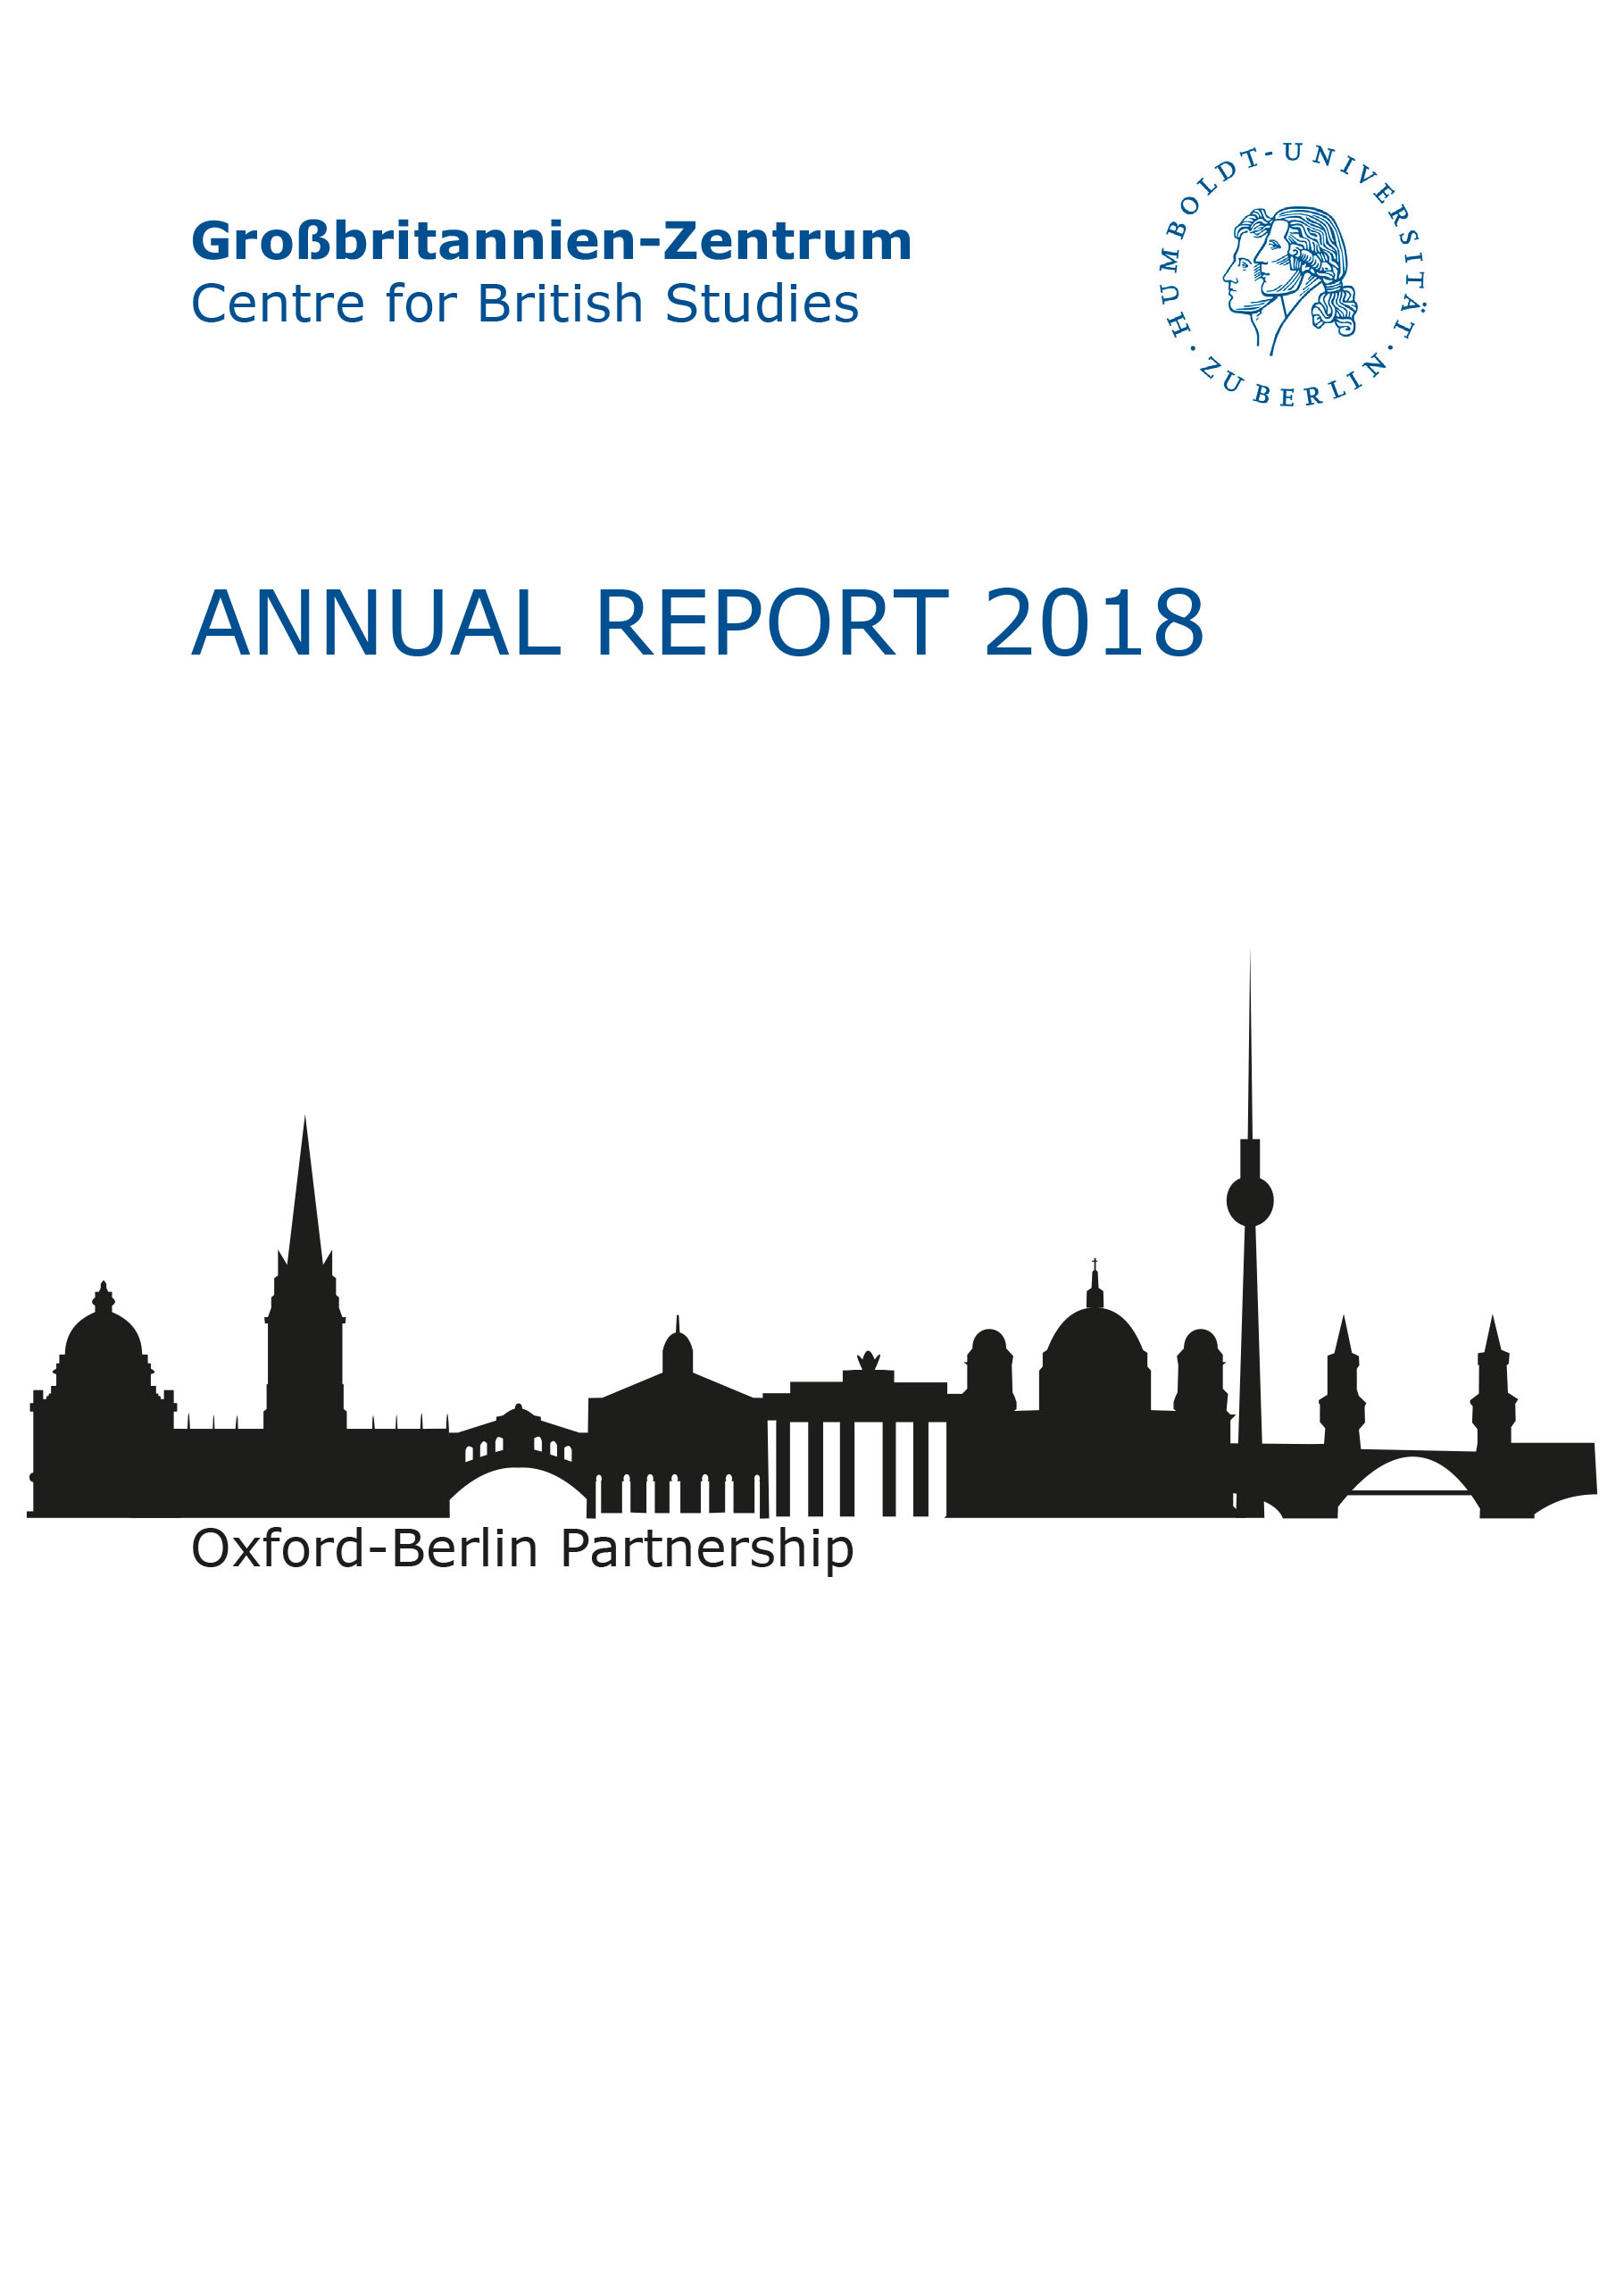 Annual Report GBZ 2018 cover